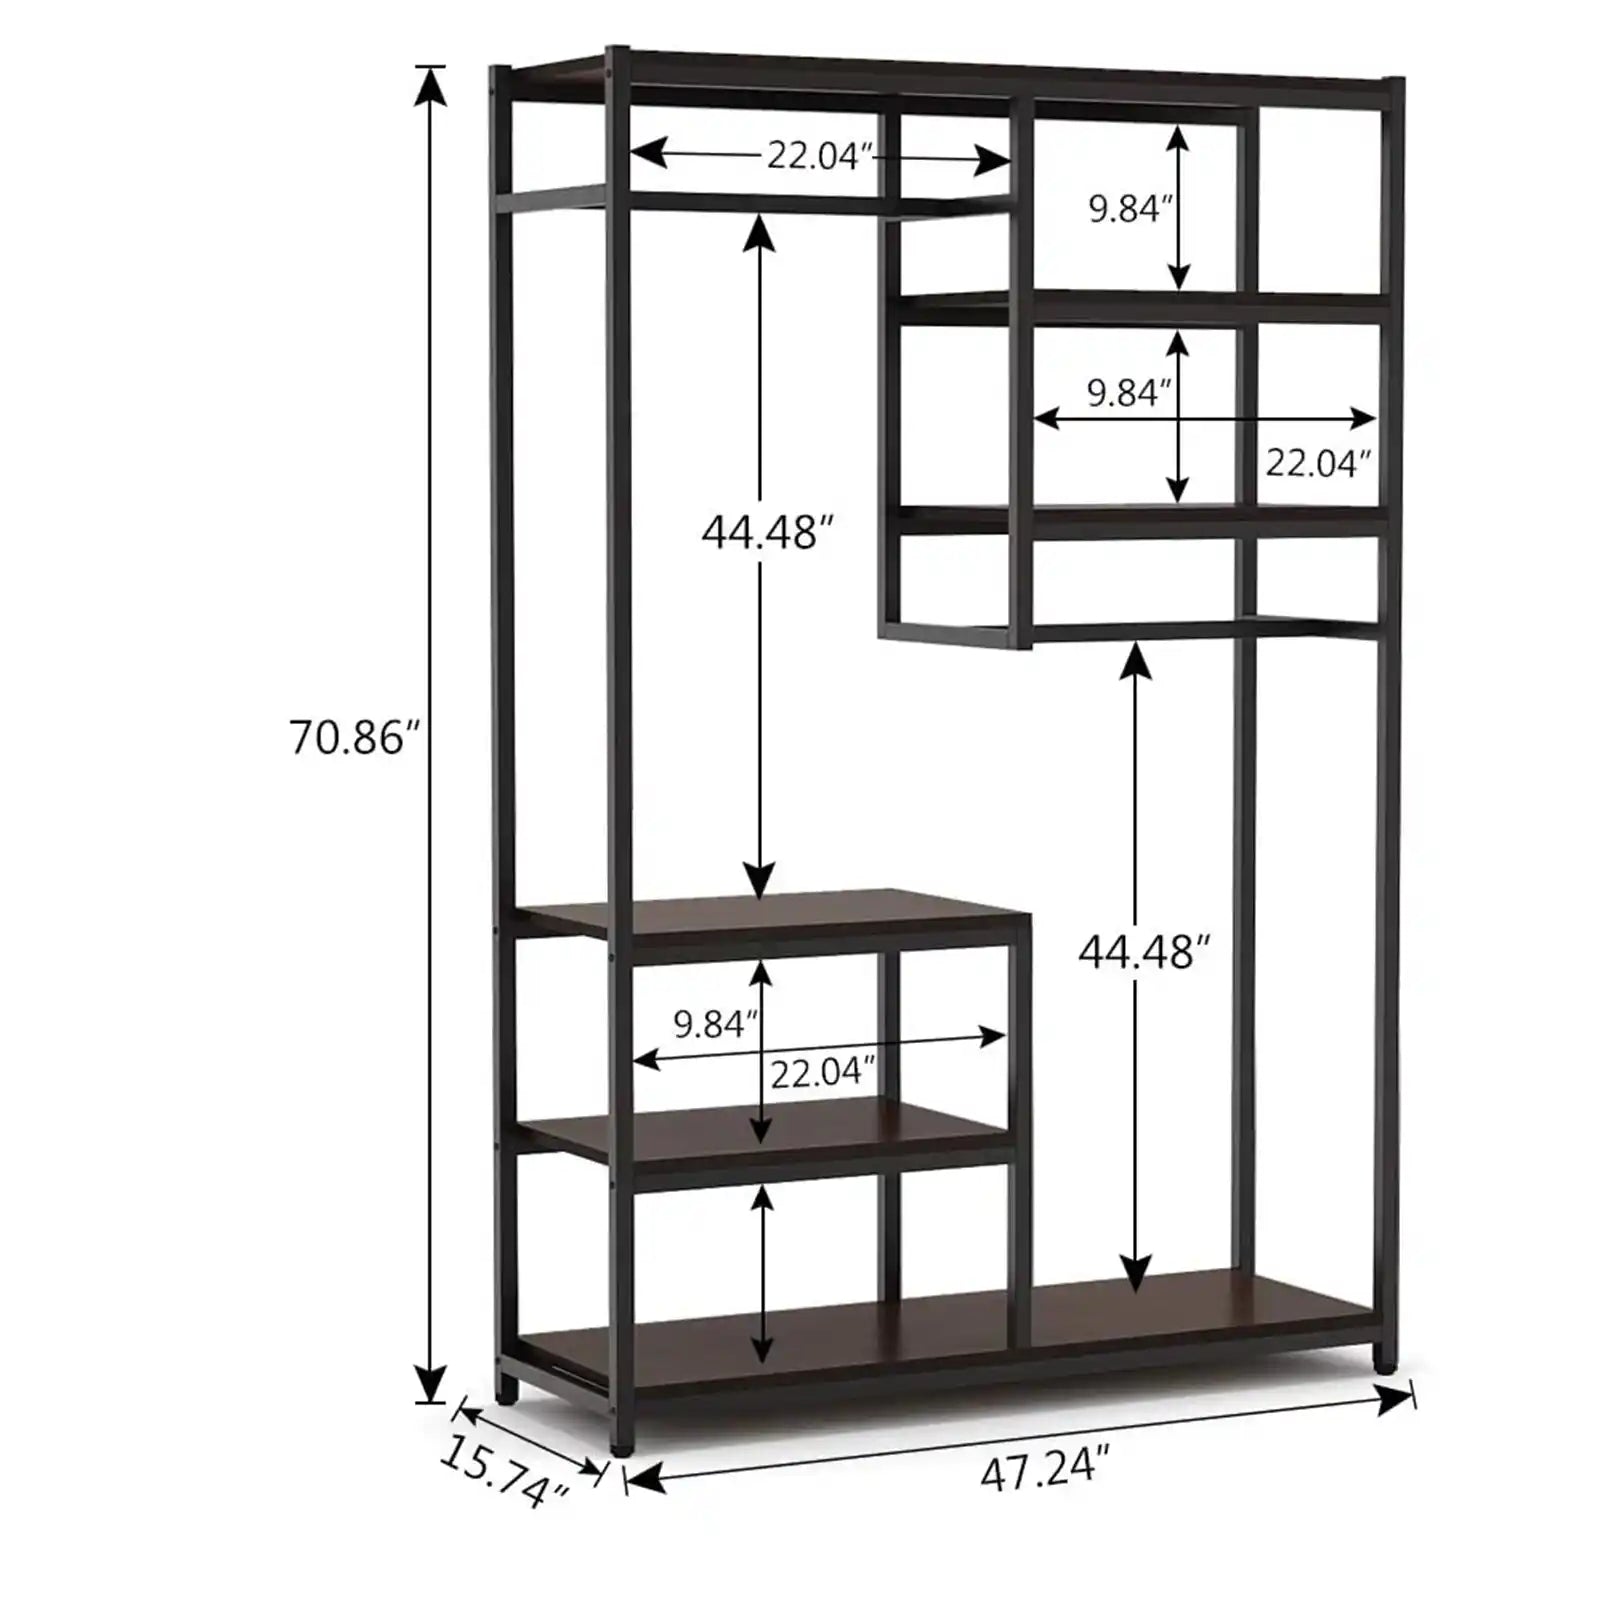 Free-standing Closet Organizer , Double Hanging Rod Clothes Garment Racks with Storage Shelvels